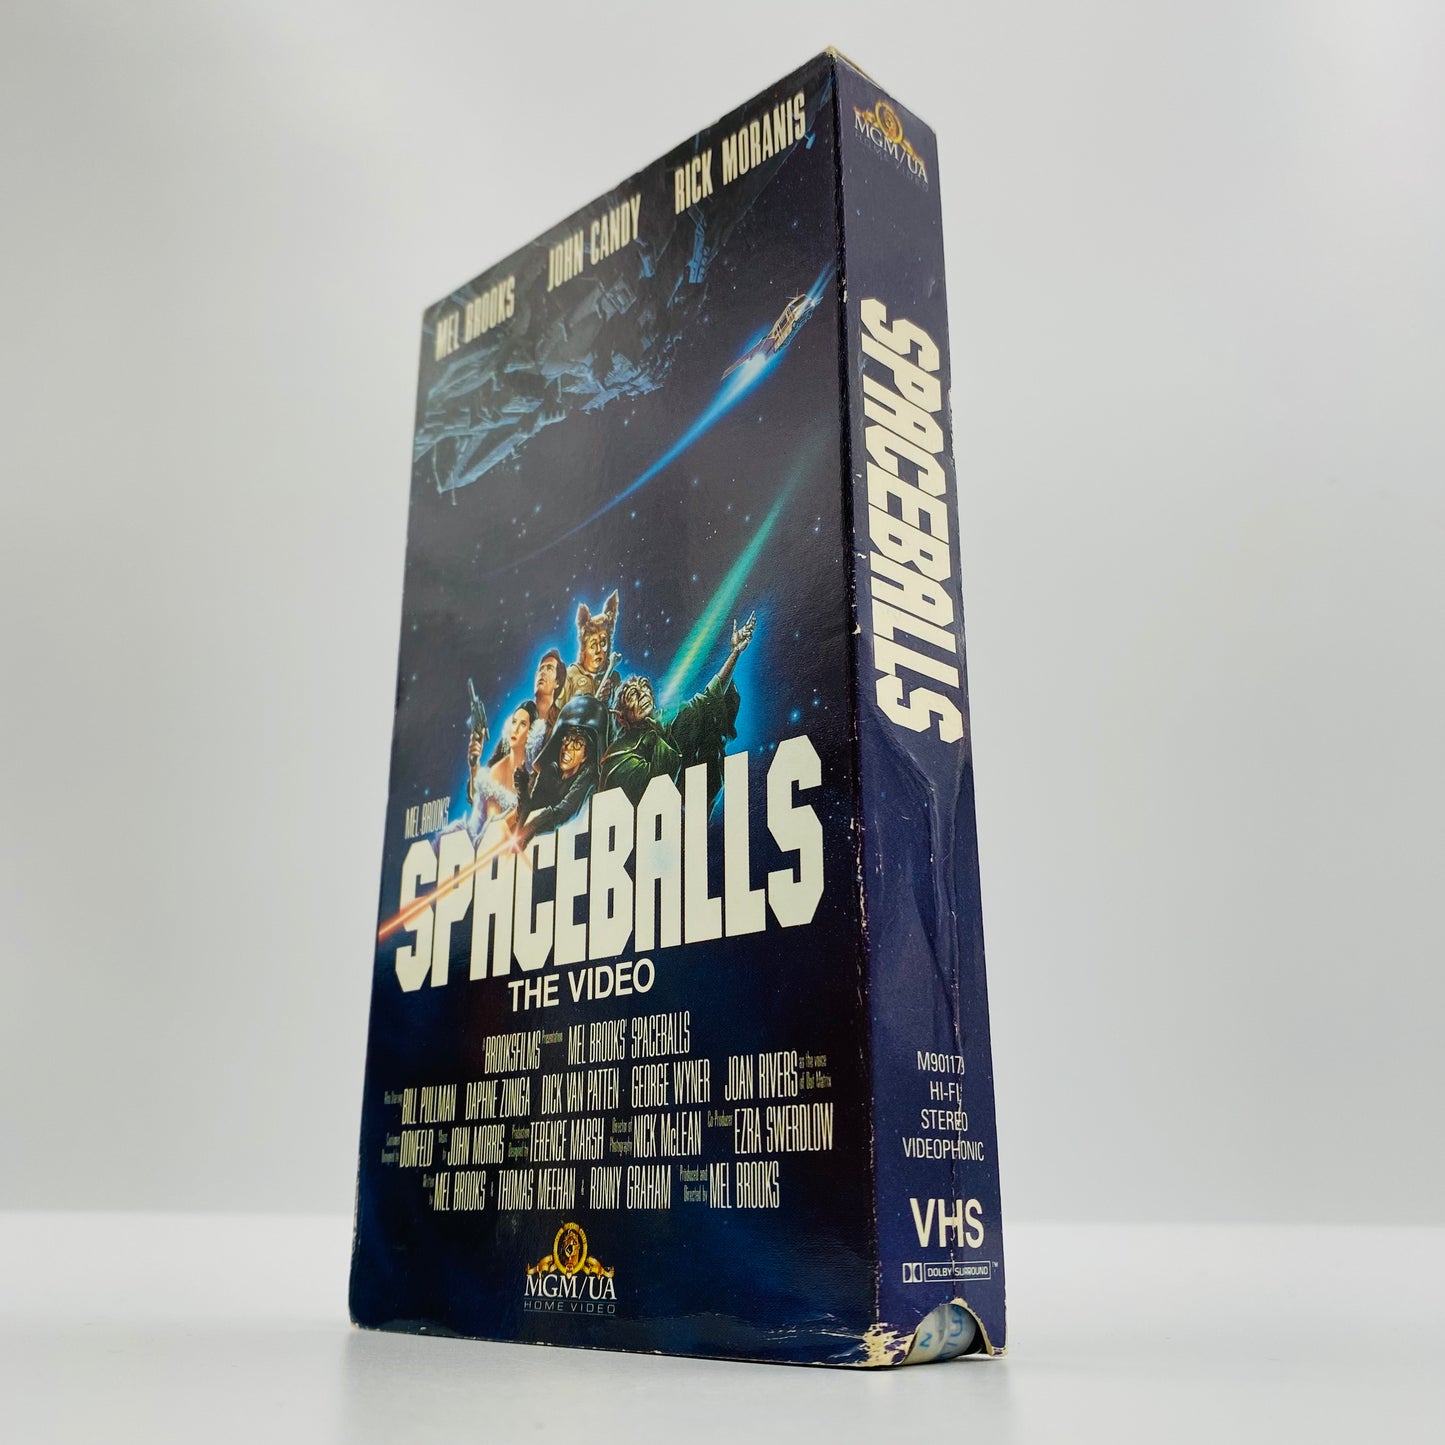 Spaceballs The Video VHS tape (1988) MGM/UA Home Video